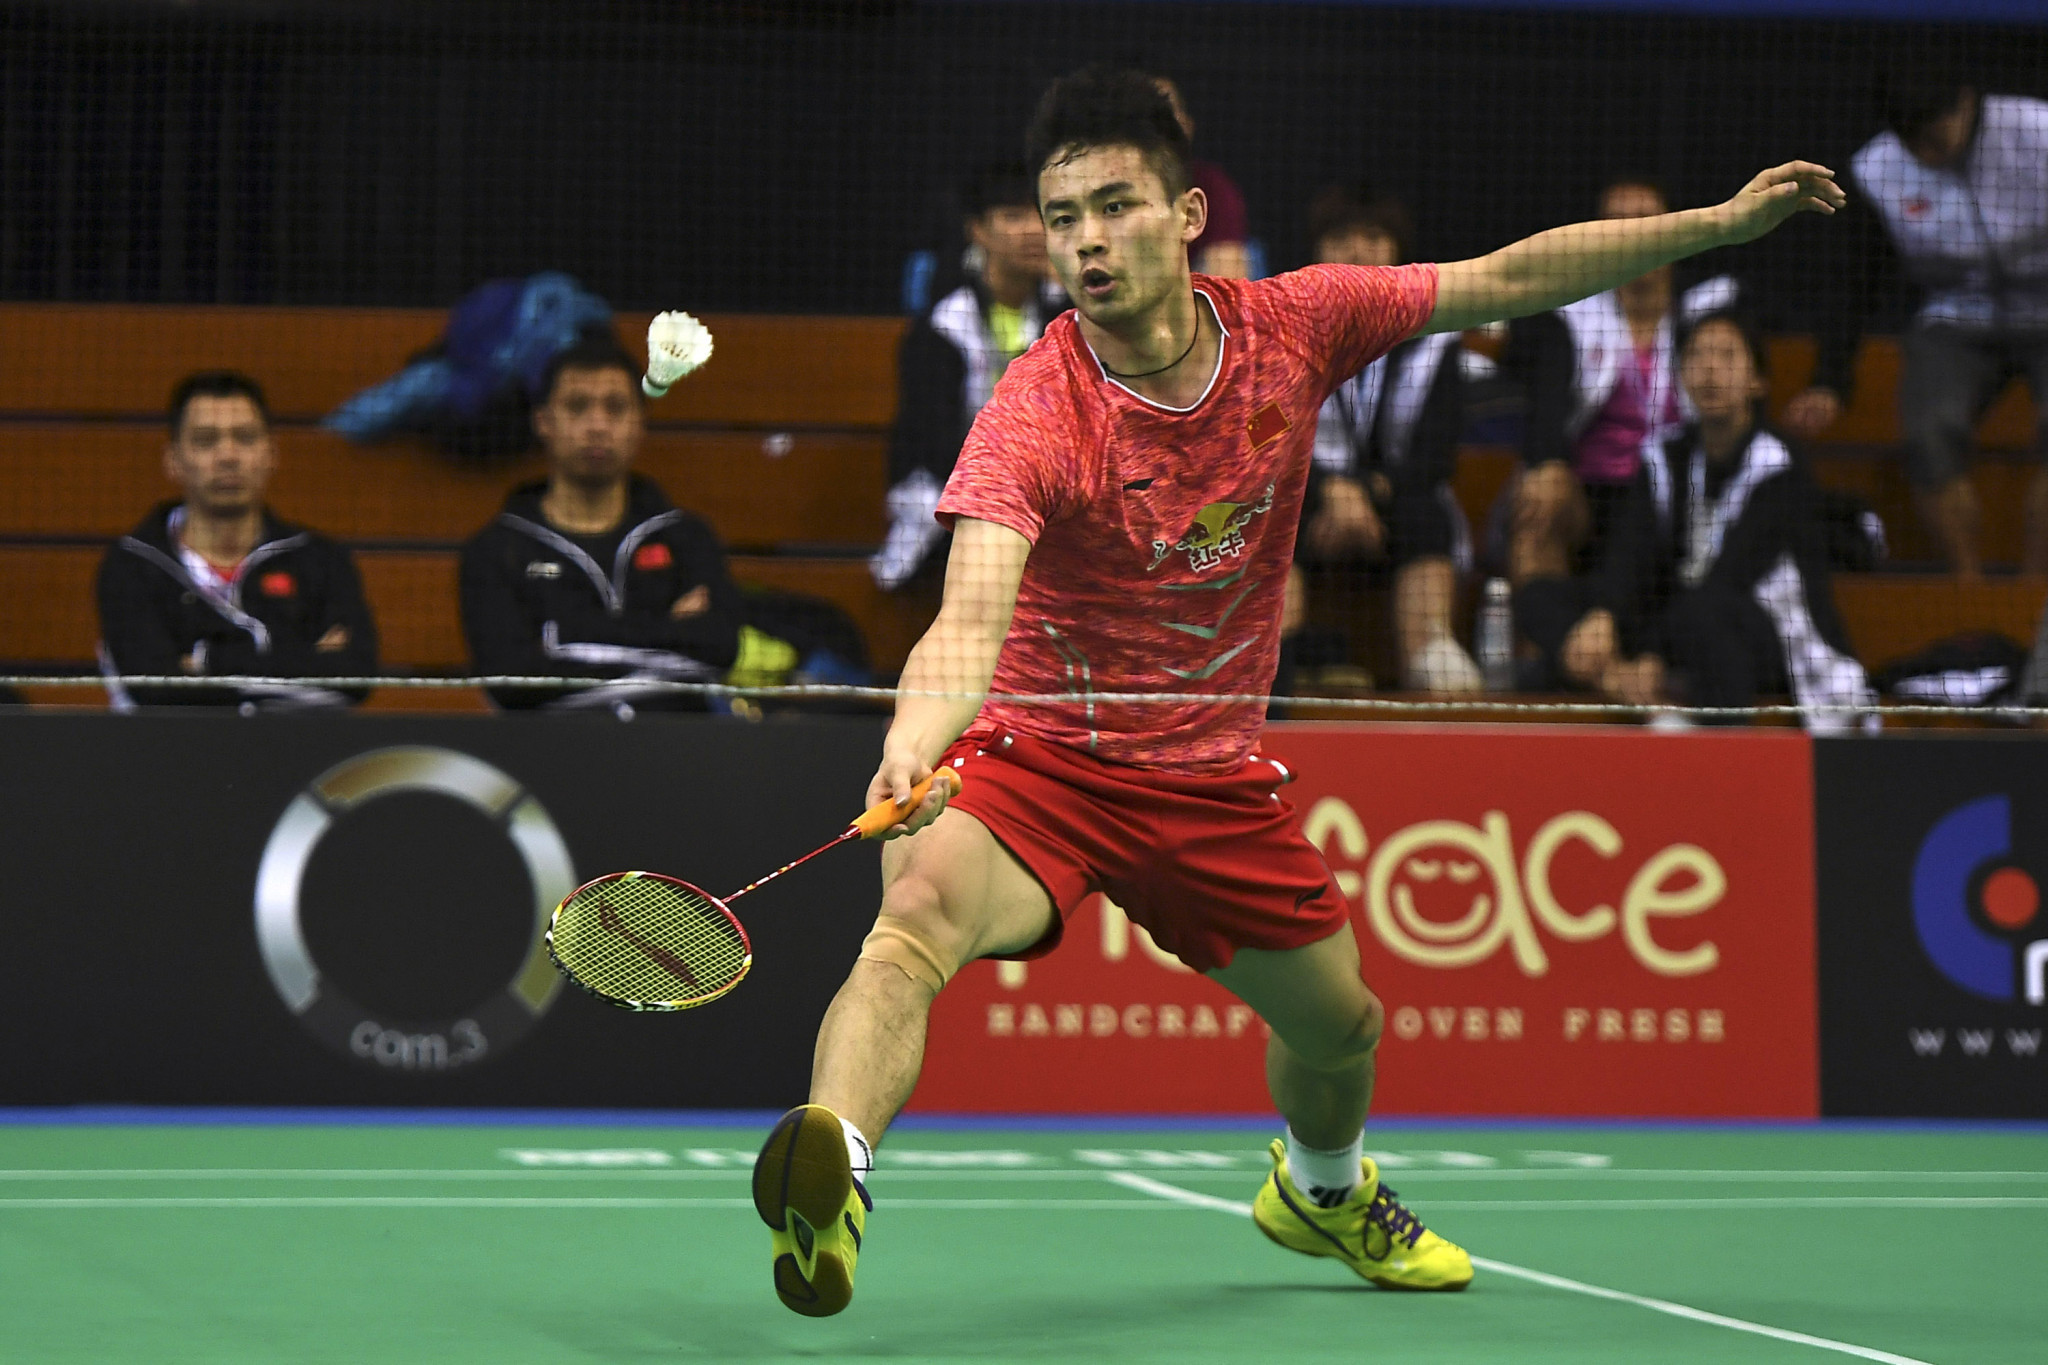 Qiao Bin helped China reach the men's semi-finals in Alor Setar ©Getty Images